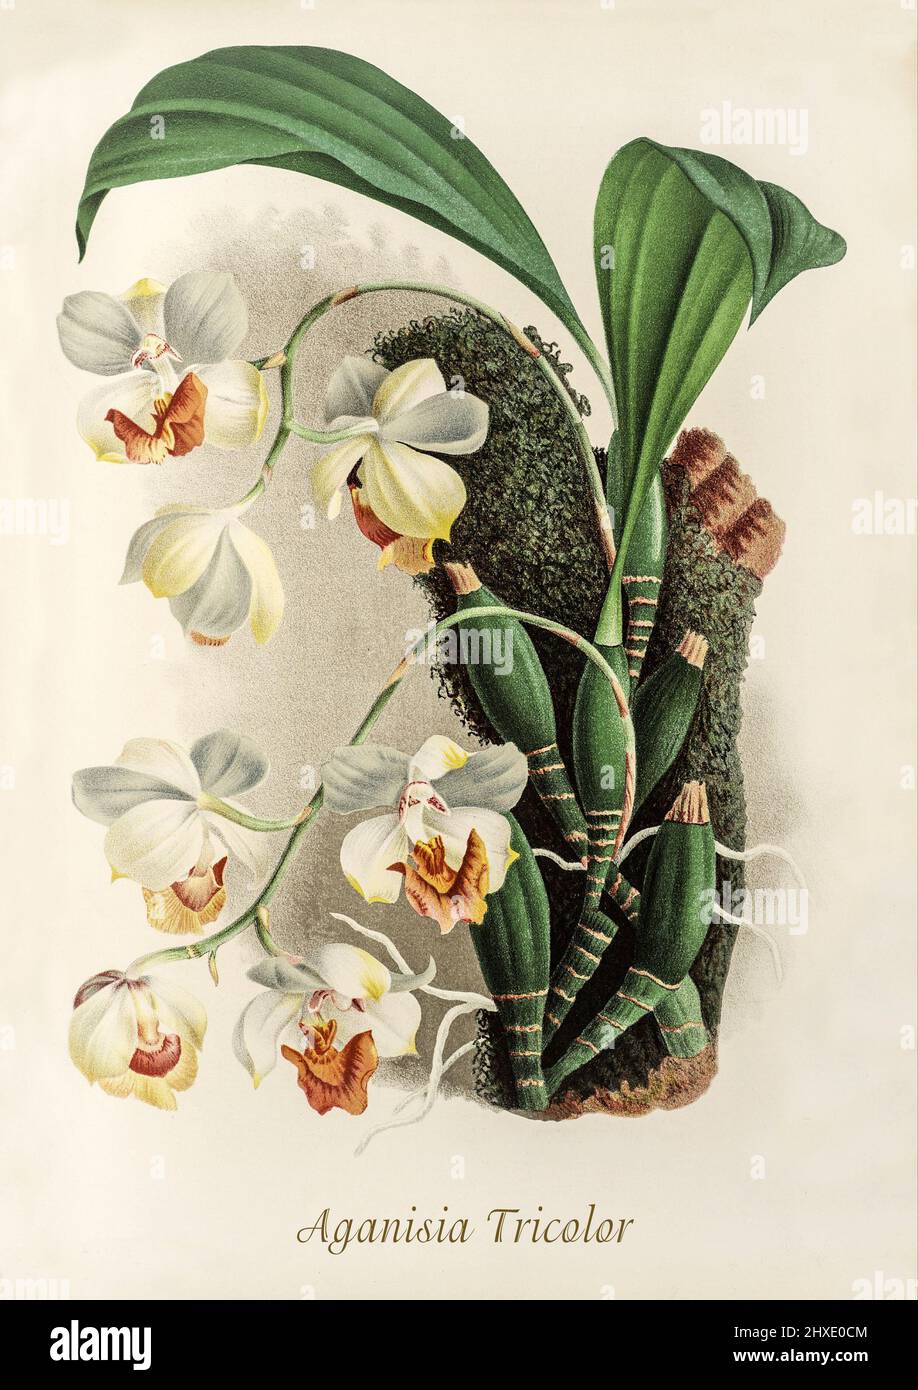 Aganisia Tricolor Brown, a South American orchid from Iconographie des Orchidees, a magazine of botanical illustrations published by Jean Jules Linden (1817-1898) was a Belgian botanist, explorer and horticulturist who specialised in orchids. Stock Photo